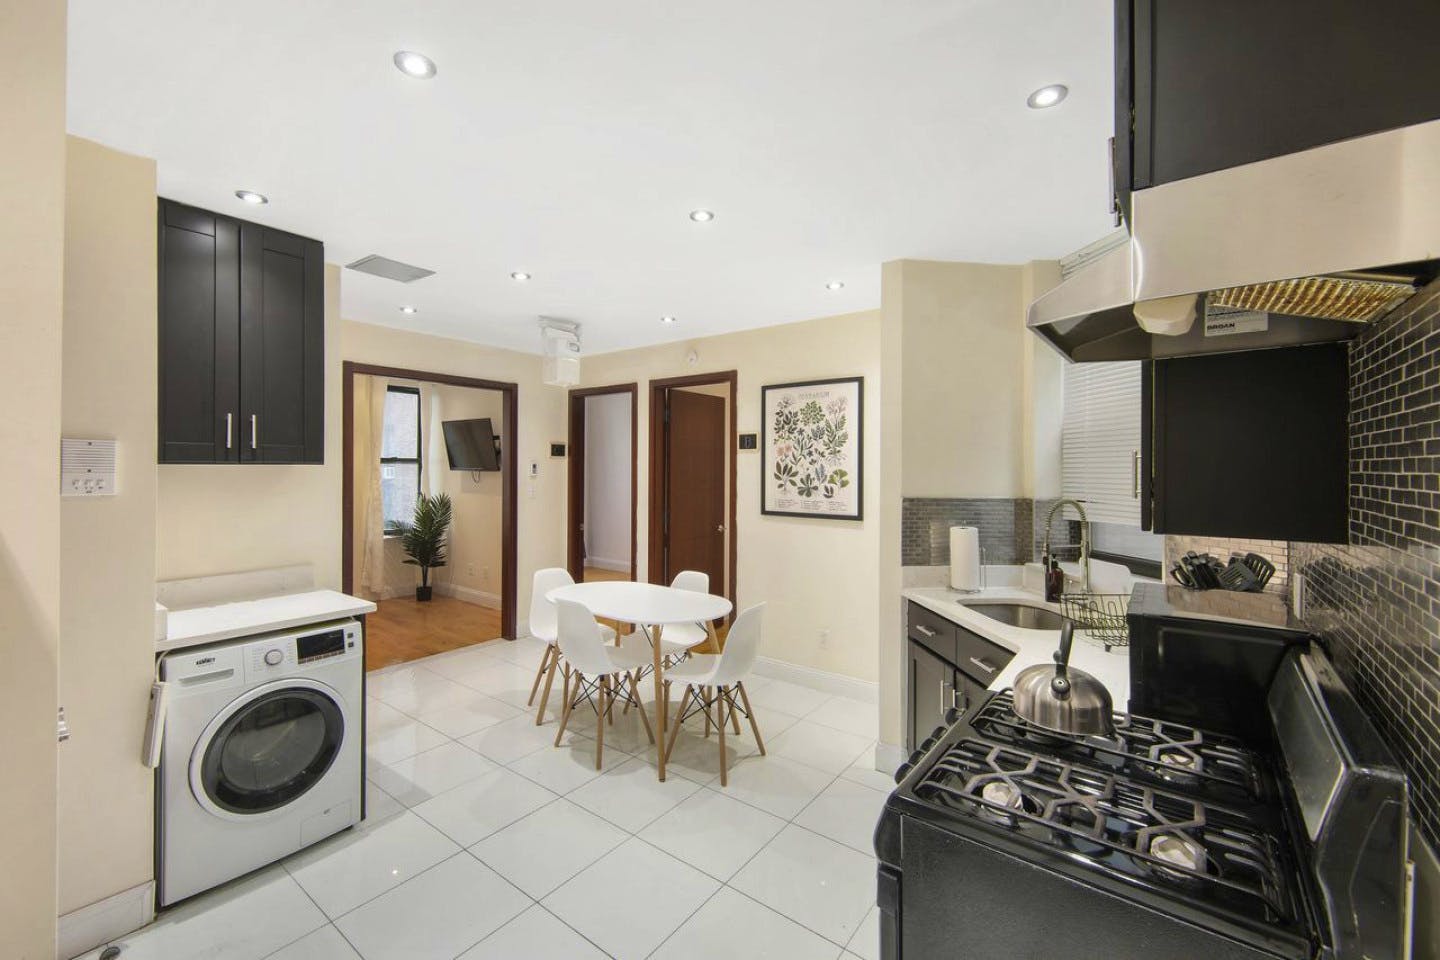 Exceptional Stunning Apt. 1 block away from Columbia University